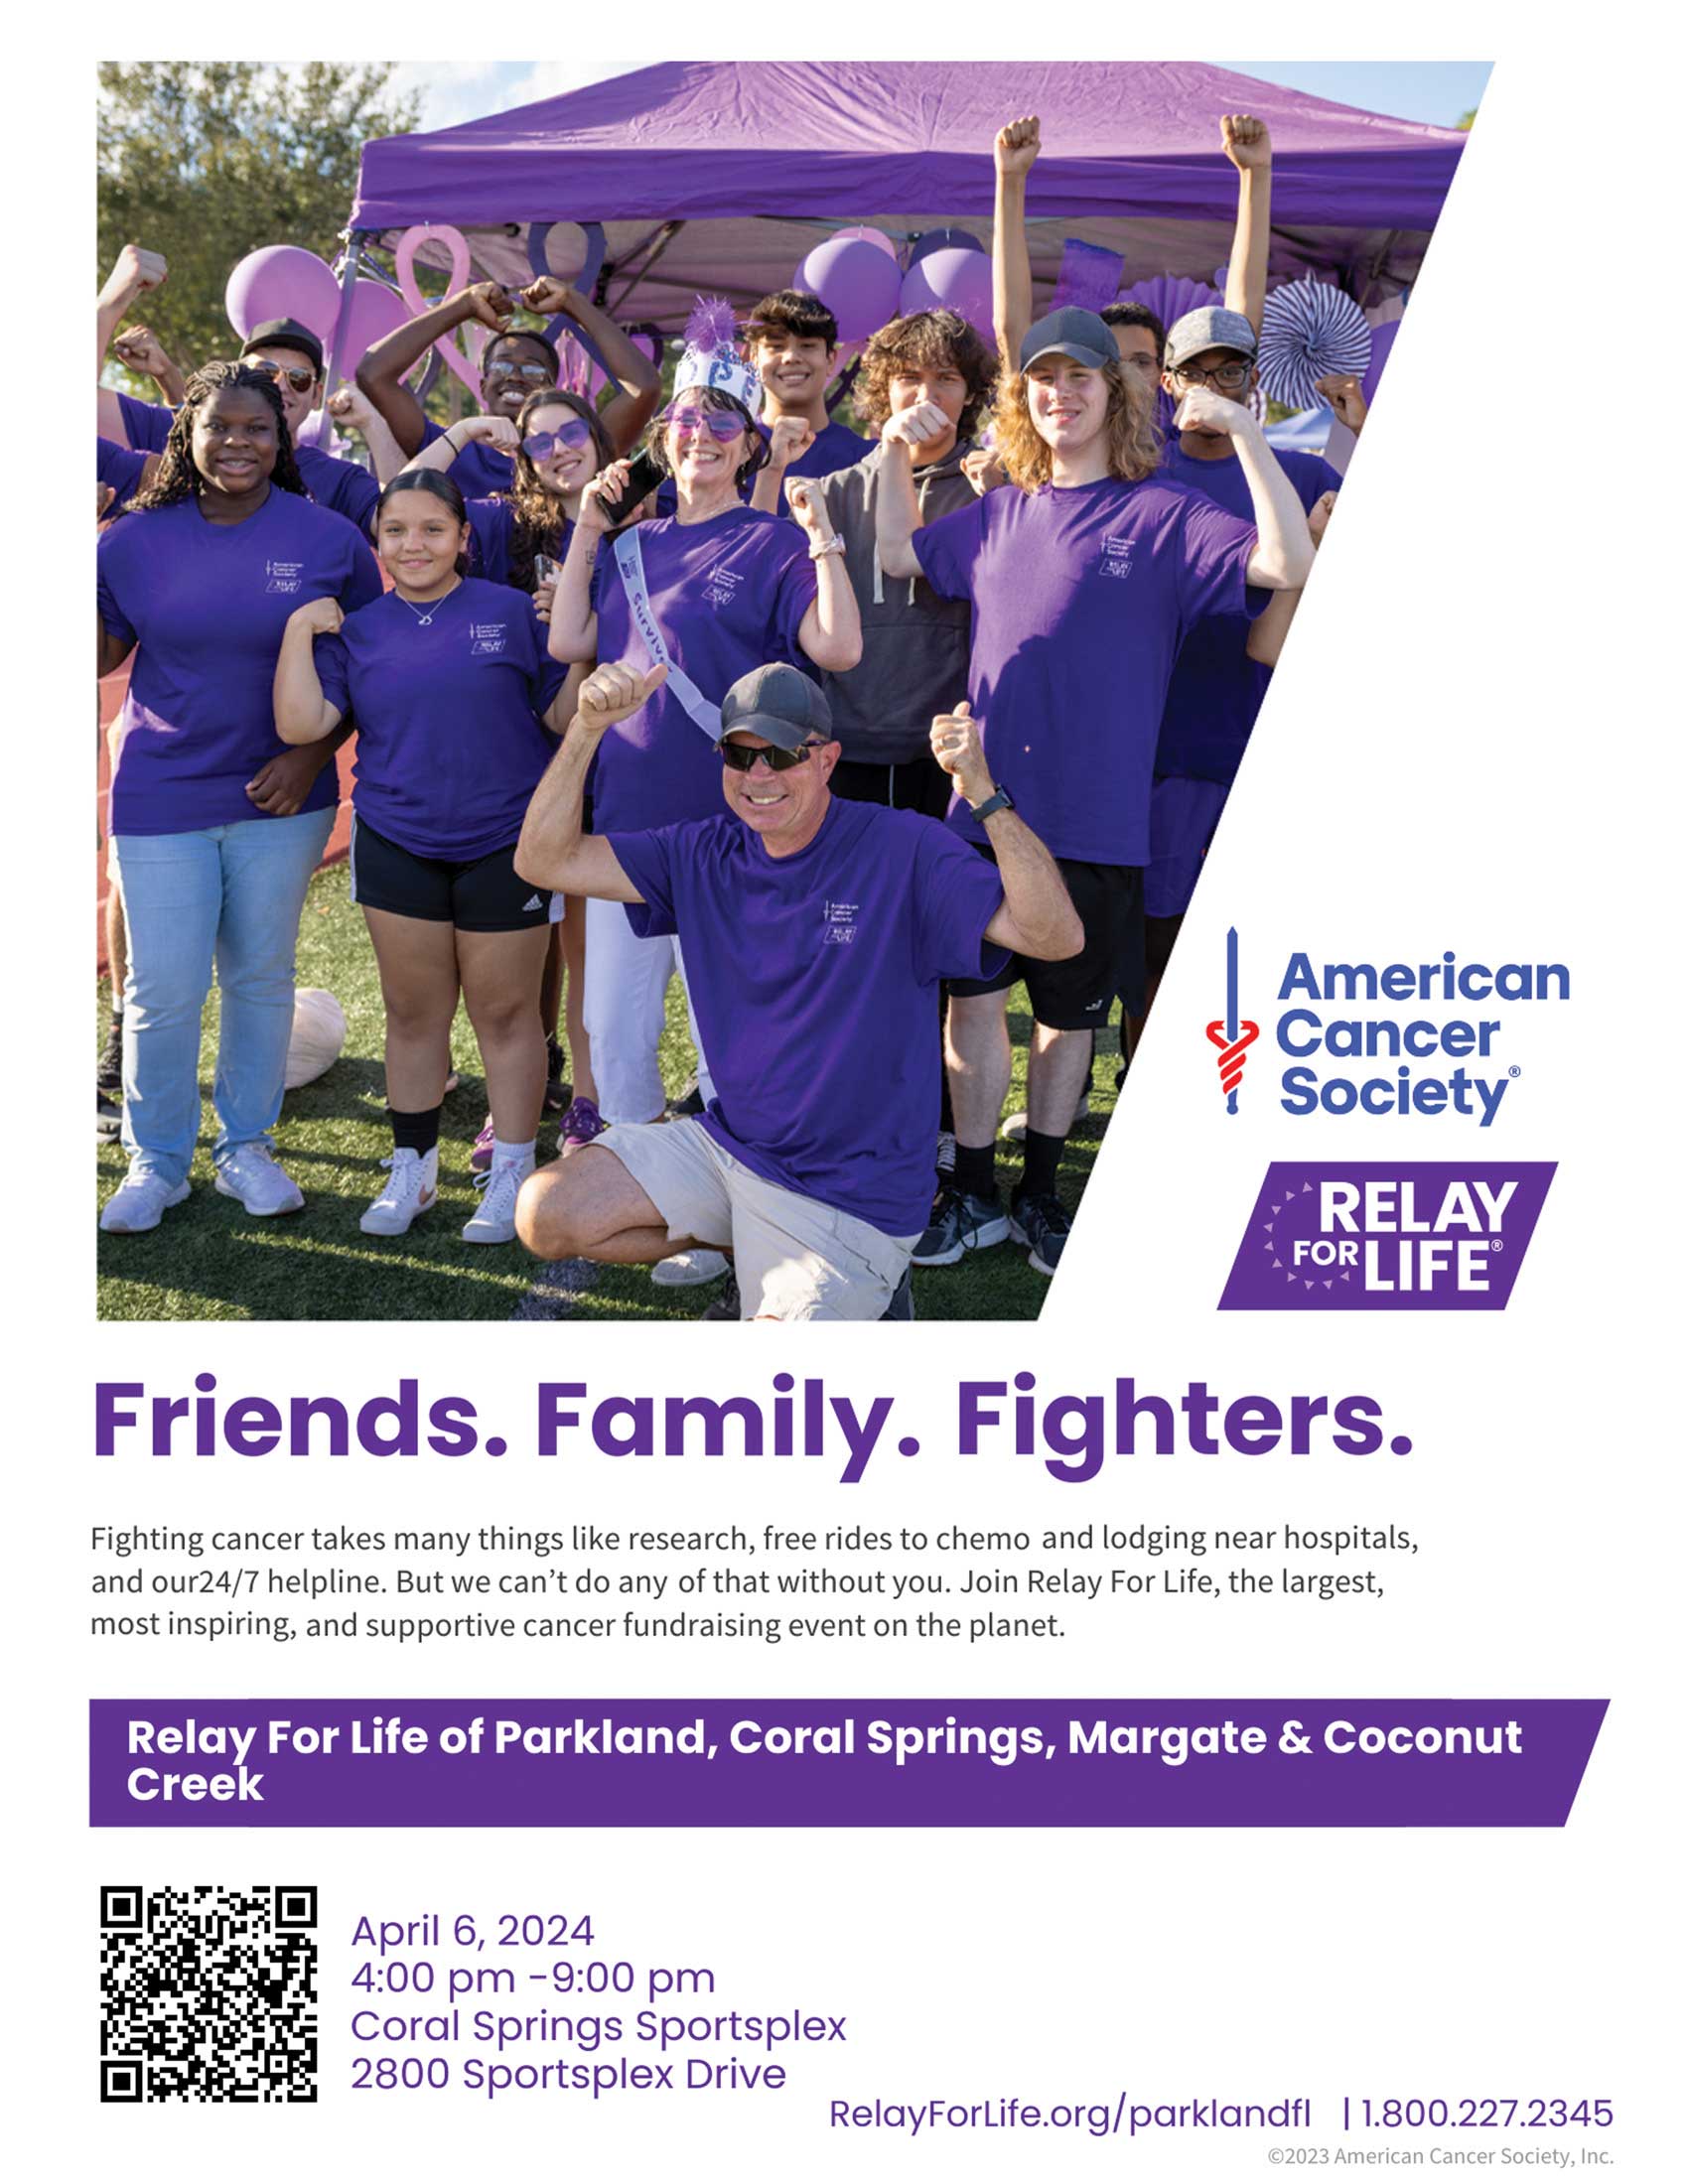 Save Lives, Celebrate Lives, and Lead the Fight at American Cancer Society Relay For Life